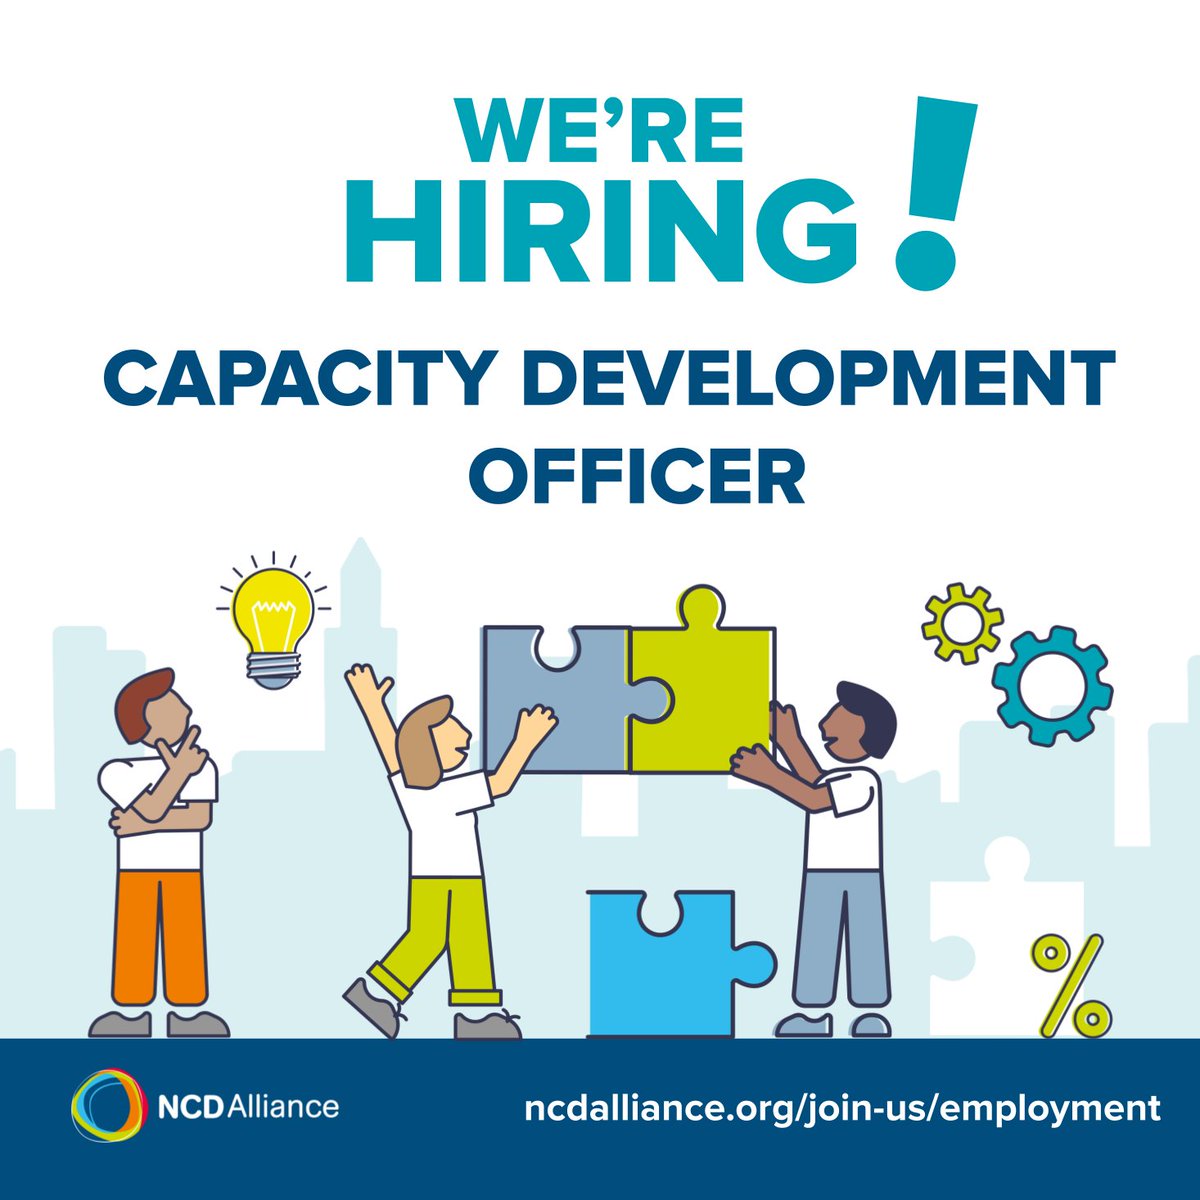 ⏰Few days left to apply! We have a wonderful opportunity for people passionate about advancing meaningful involvement of people living with NCDs in policy-making concerning them. Find details and apply by 28 April here 👉ncdalliance.org/join-us/employ…